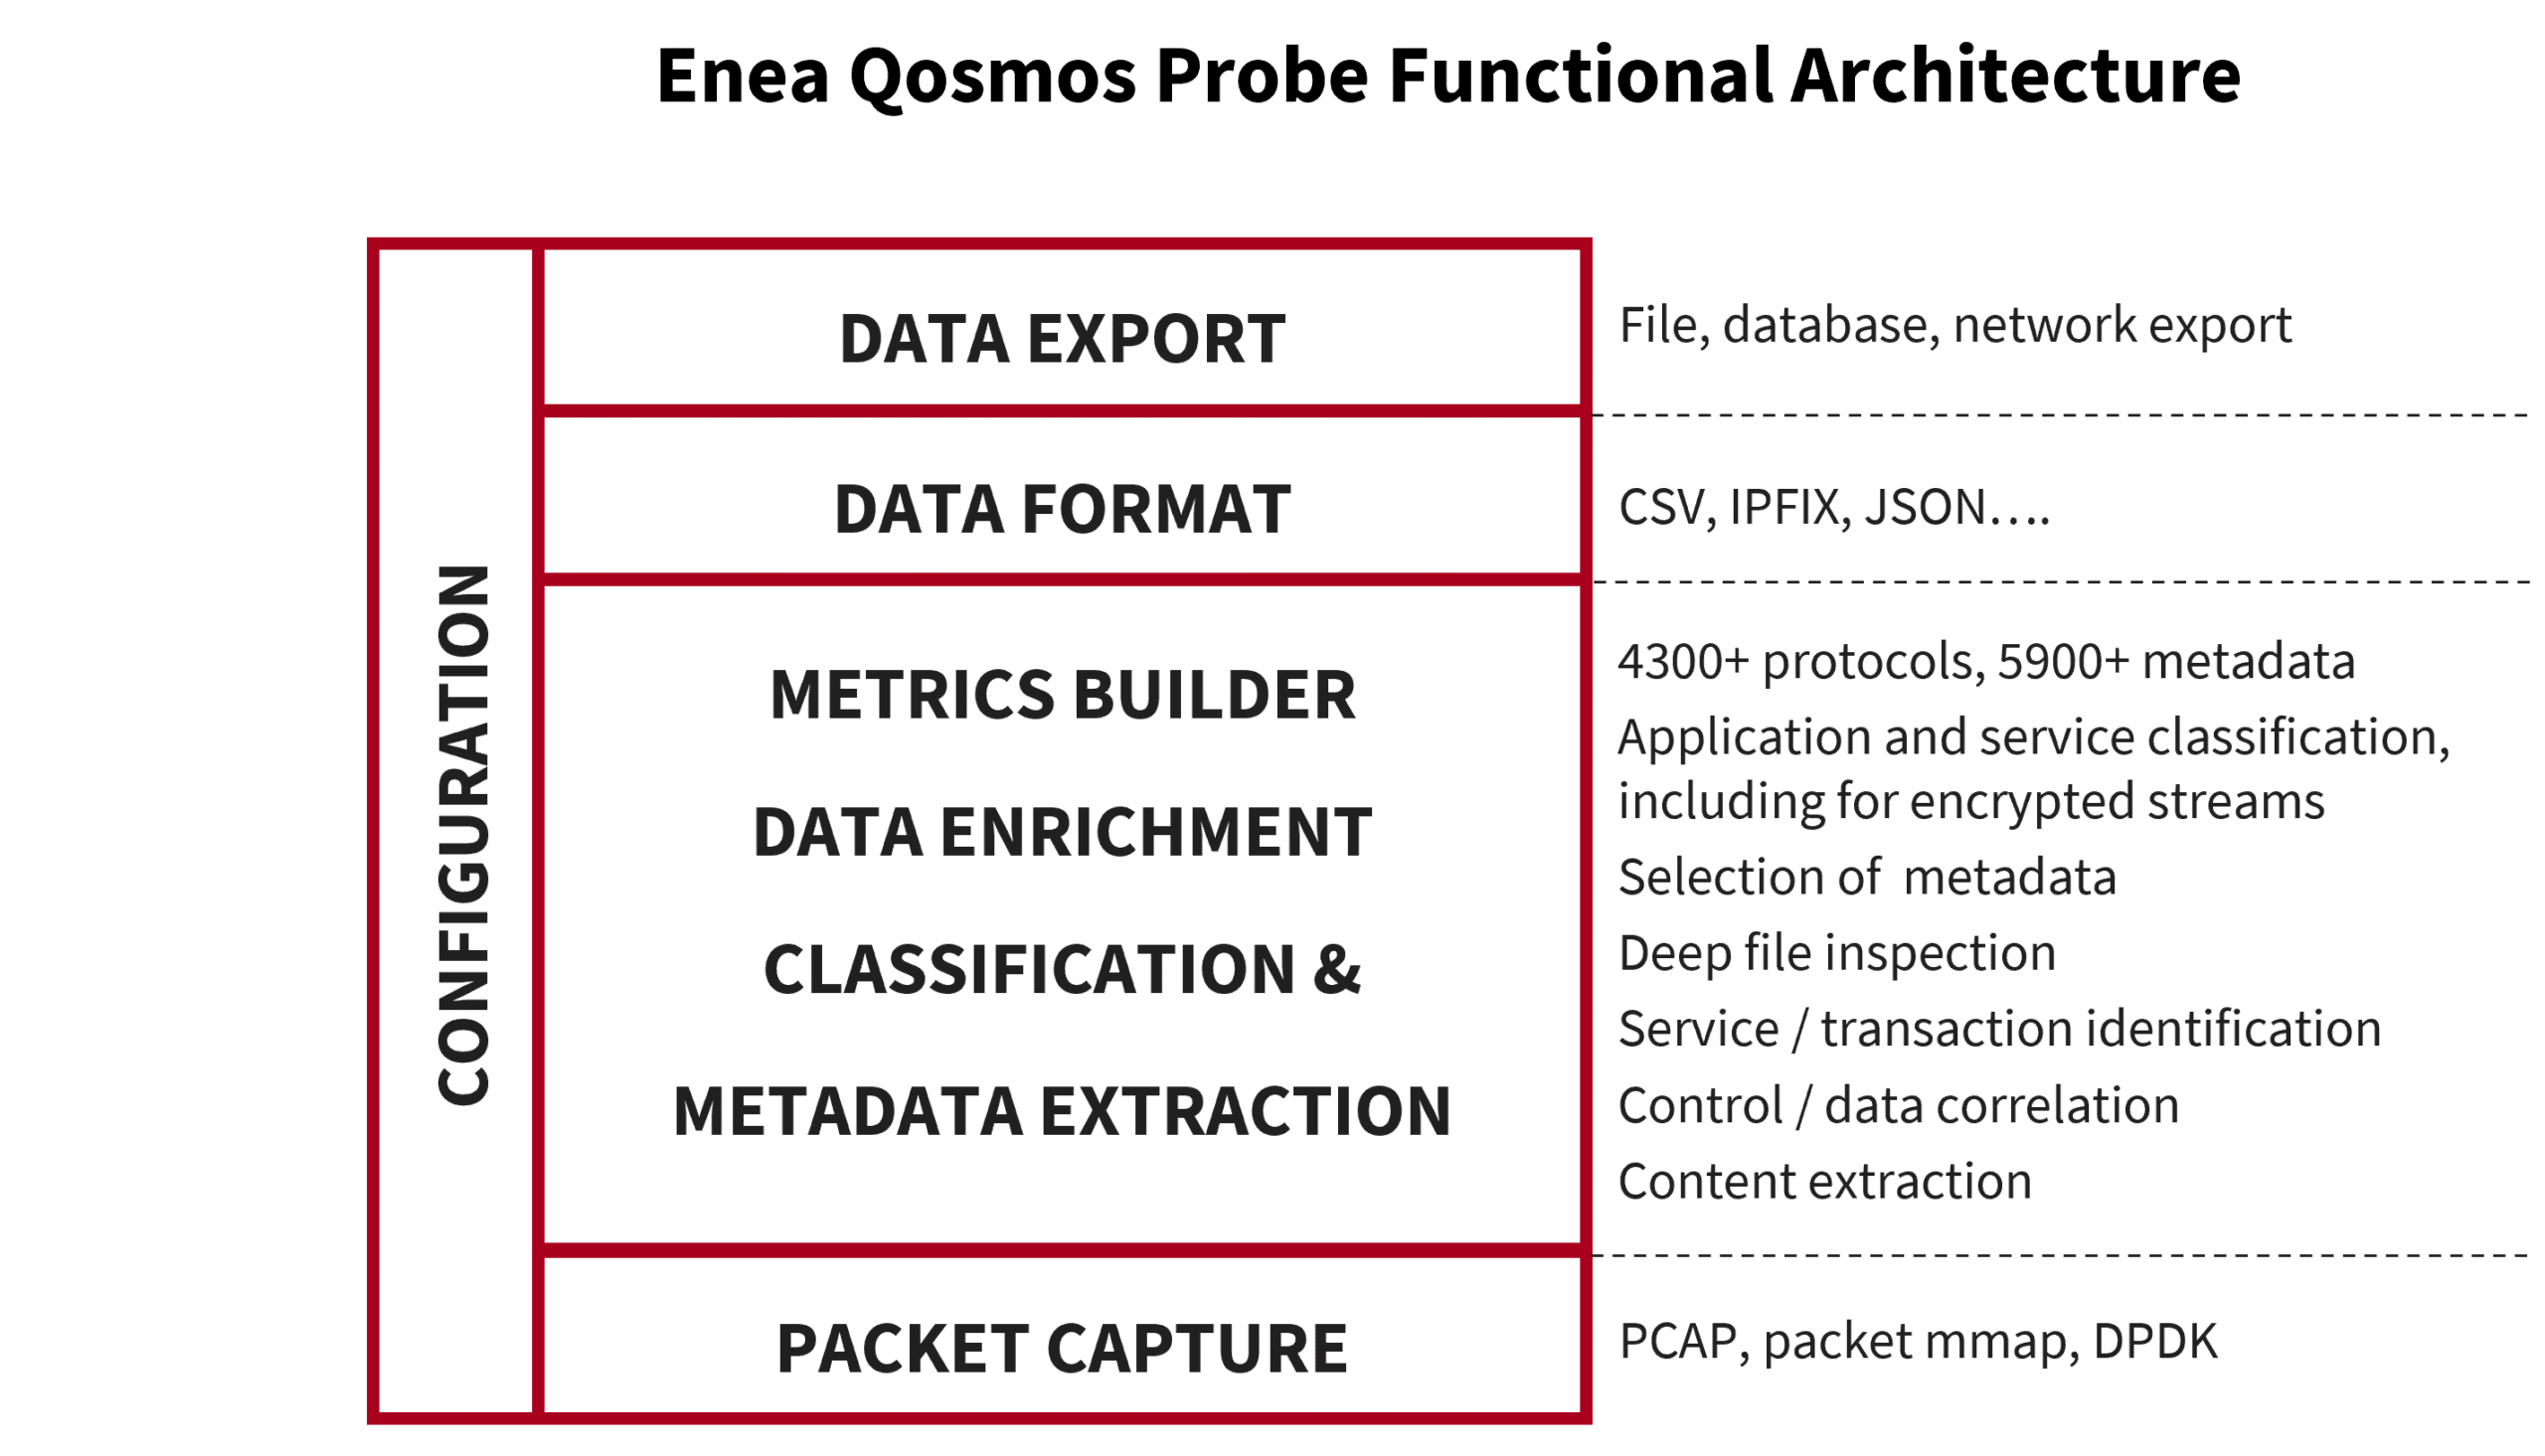 Functional Architecture of Enea Qosmos Probe, a Cyber Sensor for Network Visibility